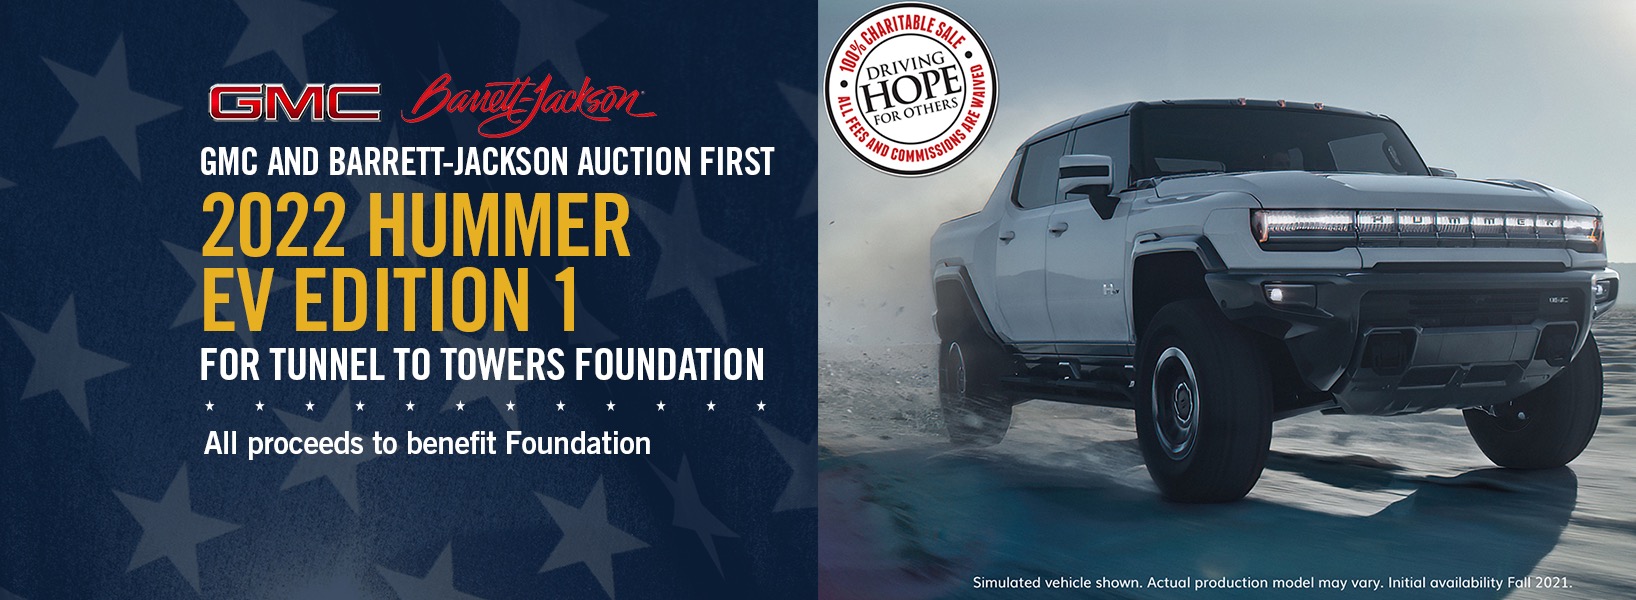 GMC and Barrett-Jackson Auction First 2022 Hummer EV for Tunnel to Towers